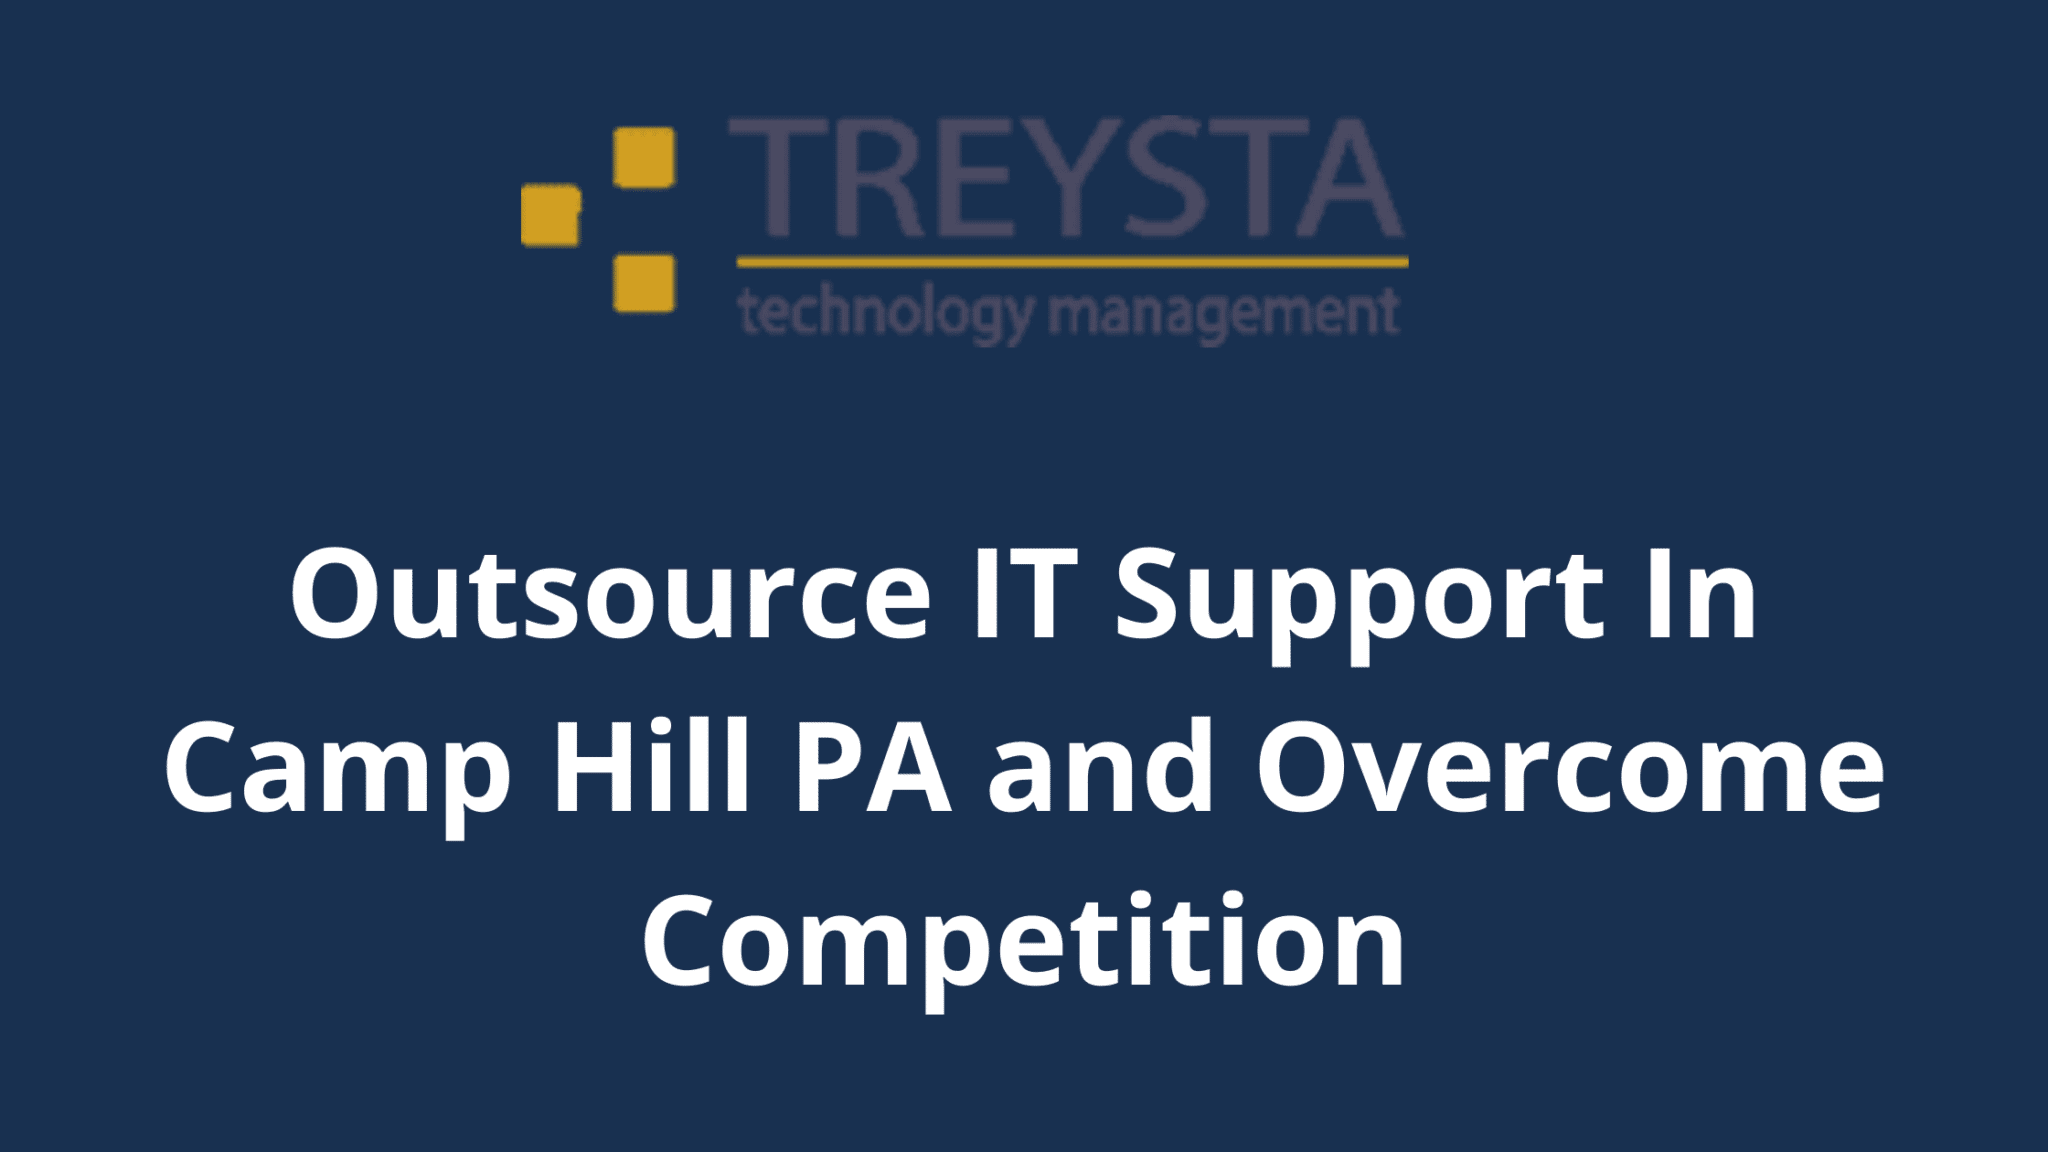 Outsource IT Support In Camp Hill PA and Overcome Competition